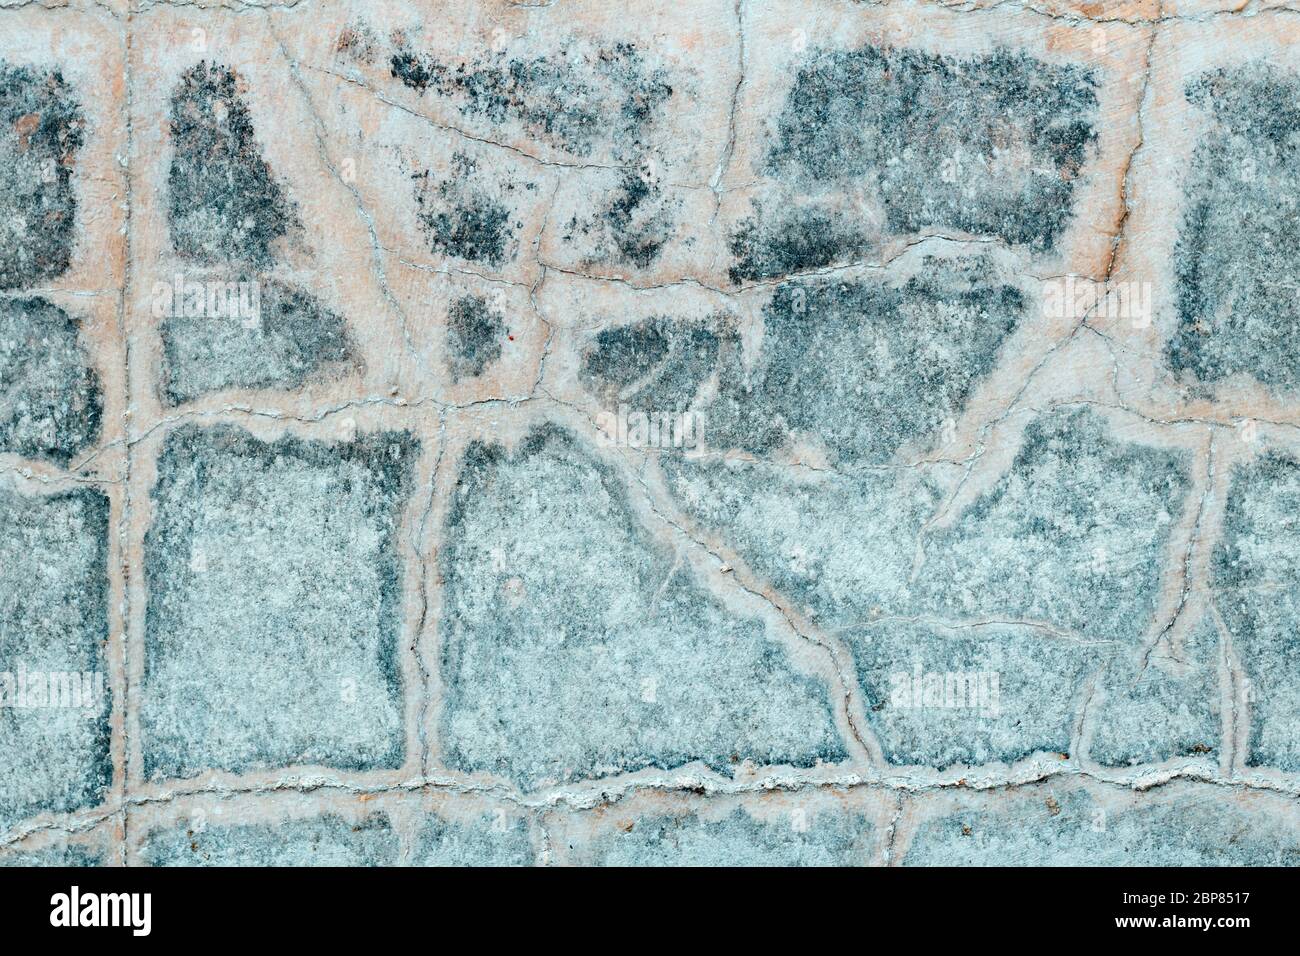 Texture of weathered cracked concrete wall as abstract background Stock Photo